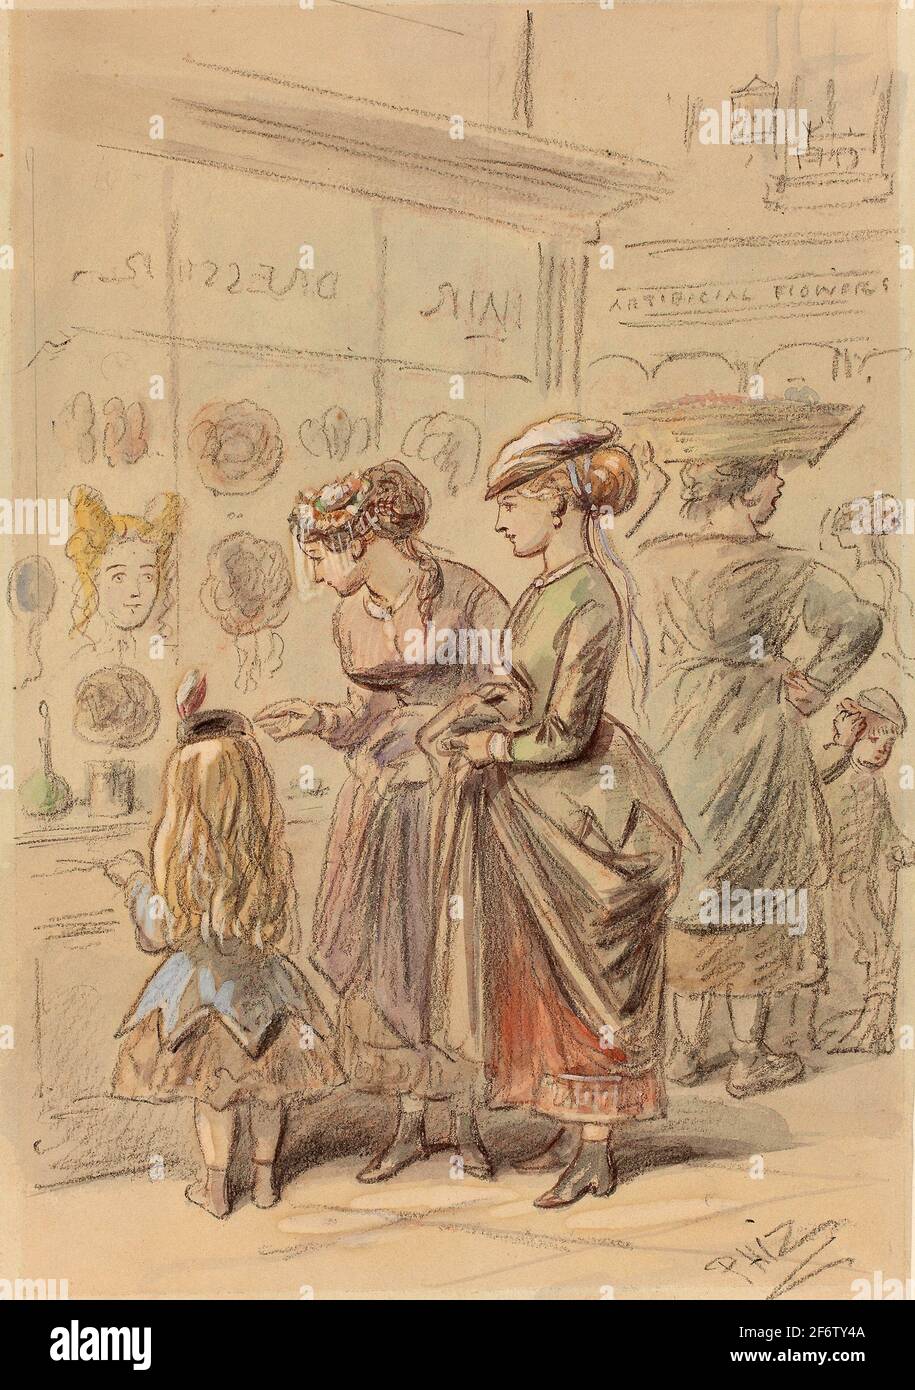 Author: Hablot Knight Browne. Two Ladies and Little Girl Before Hairdresser's Shop - Hablot Knight Browne English, 1815-1882. Watercolor and black Stock Photo